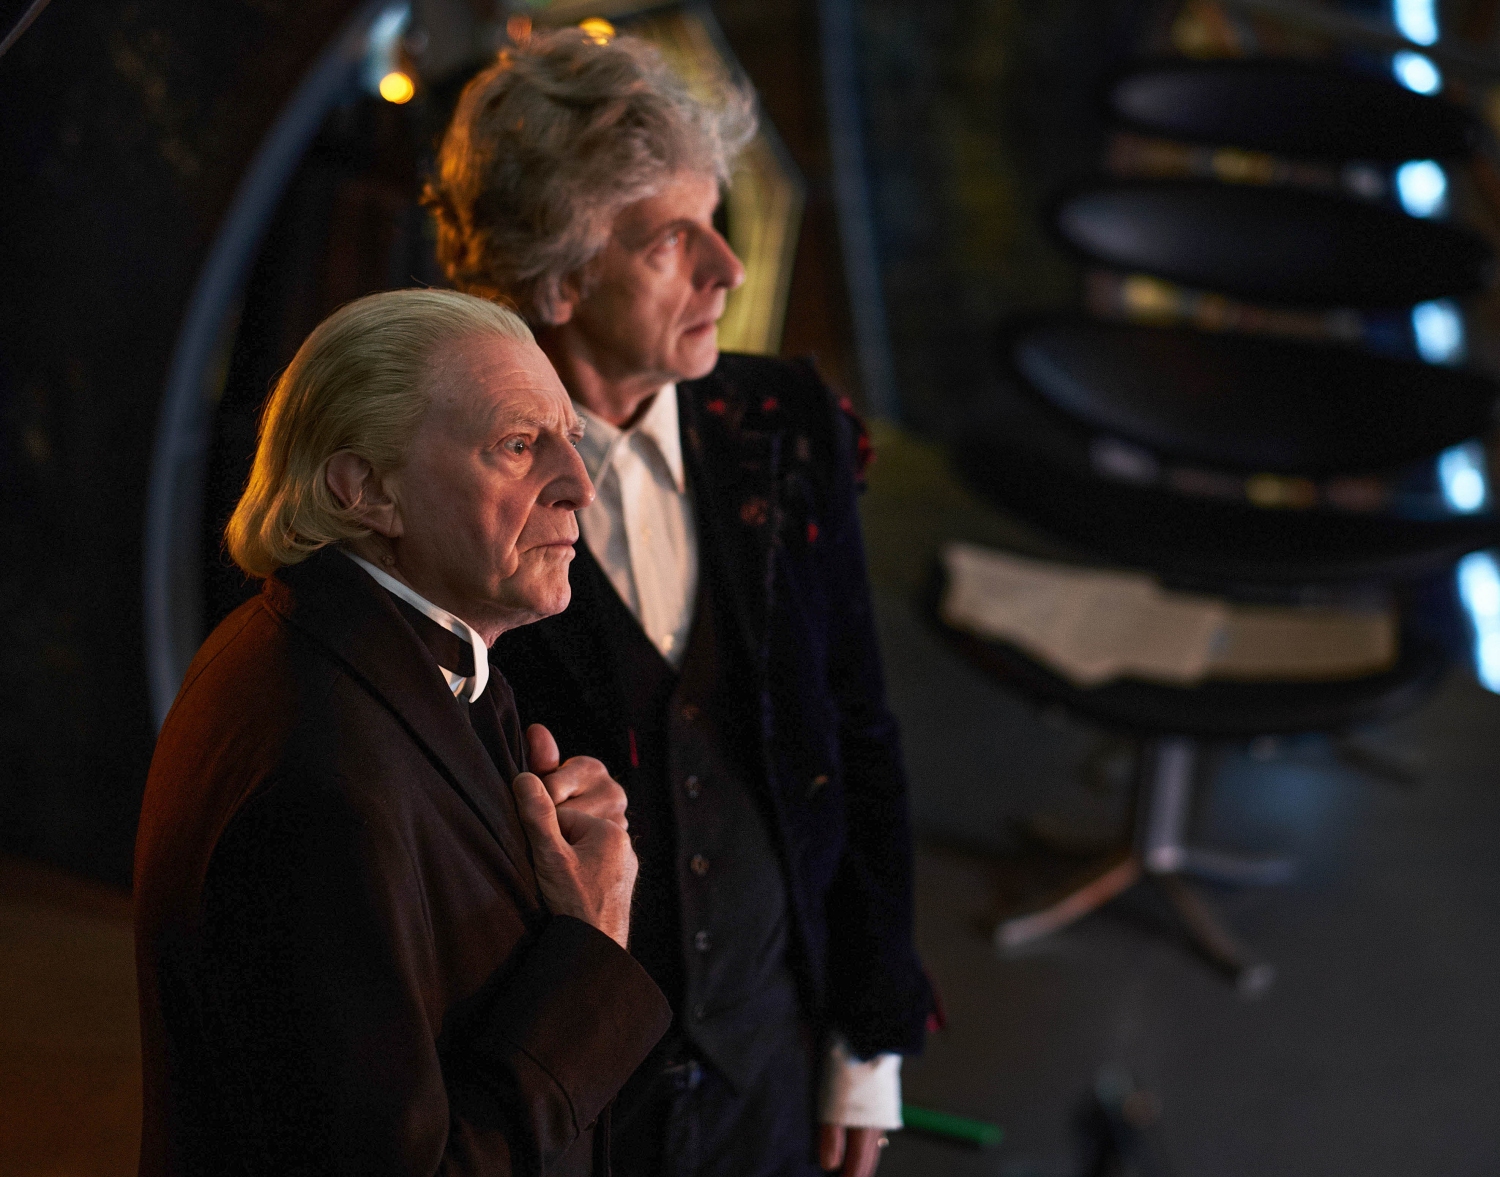 watch twice upon a time doctor who online